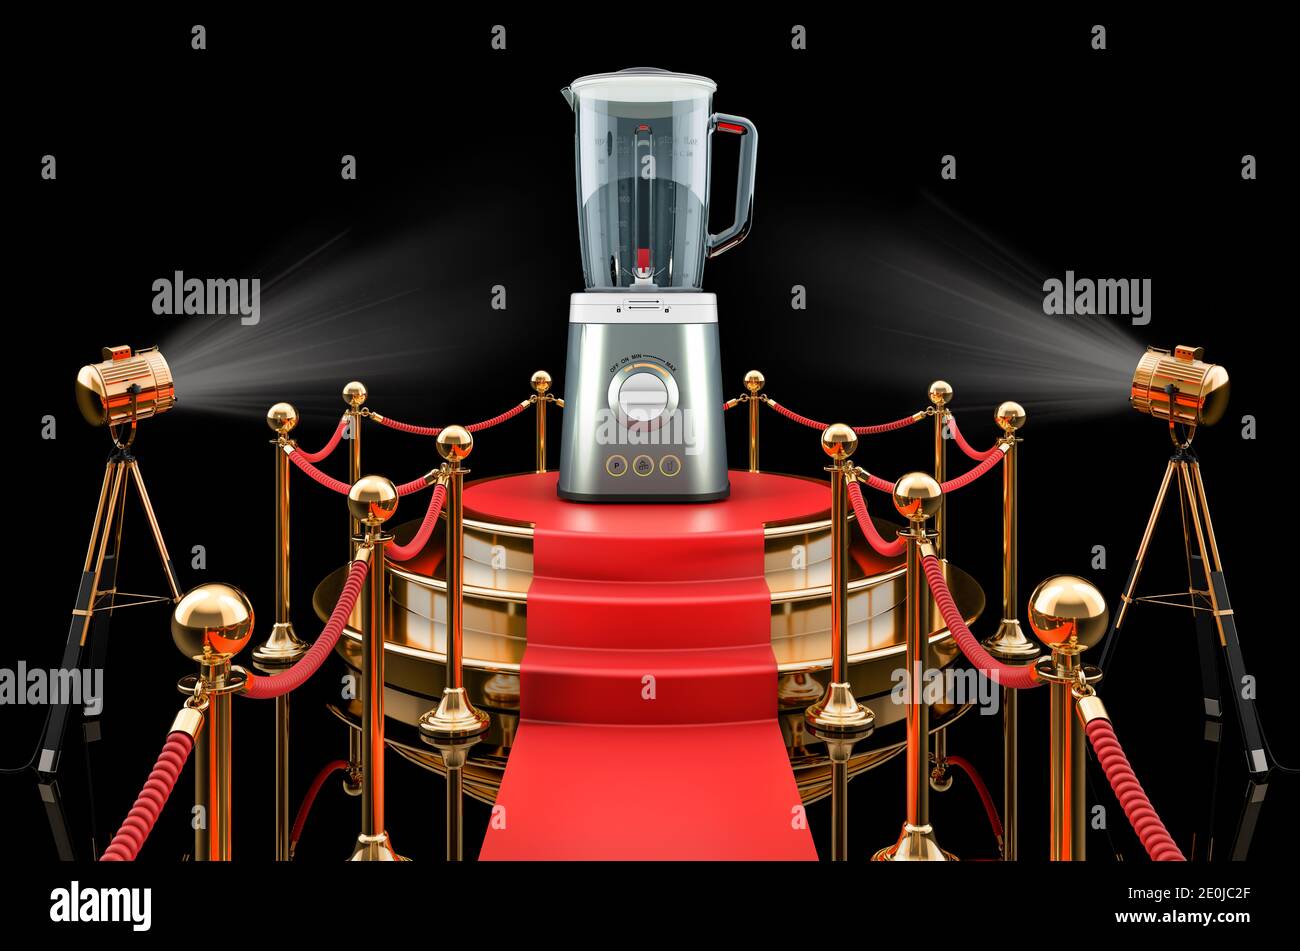 Podium with electric blender, 3D rendering isolated on black background Stock Photo